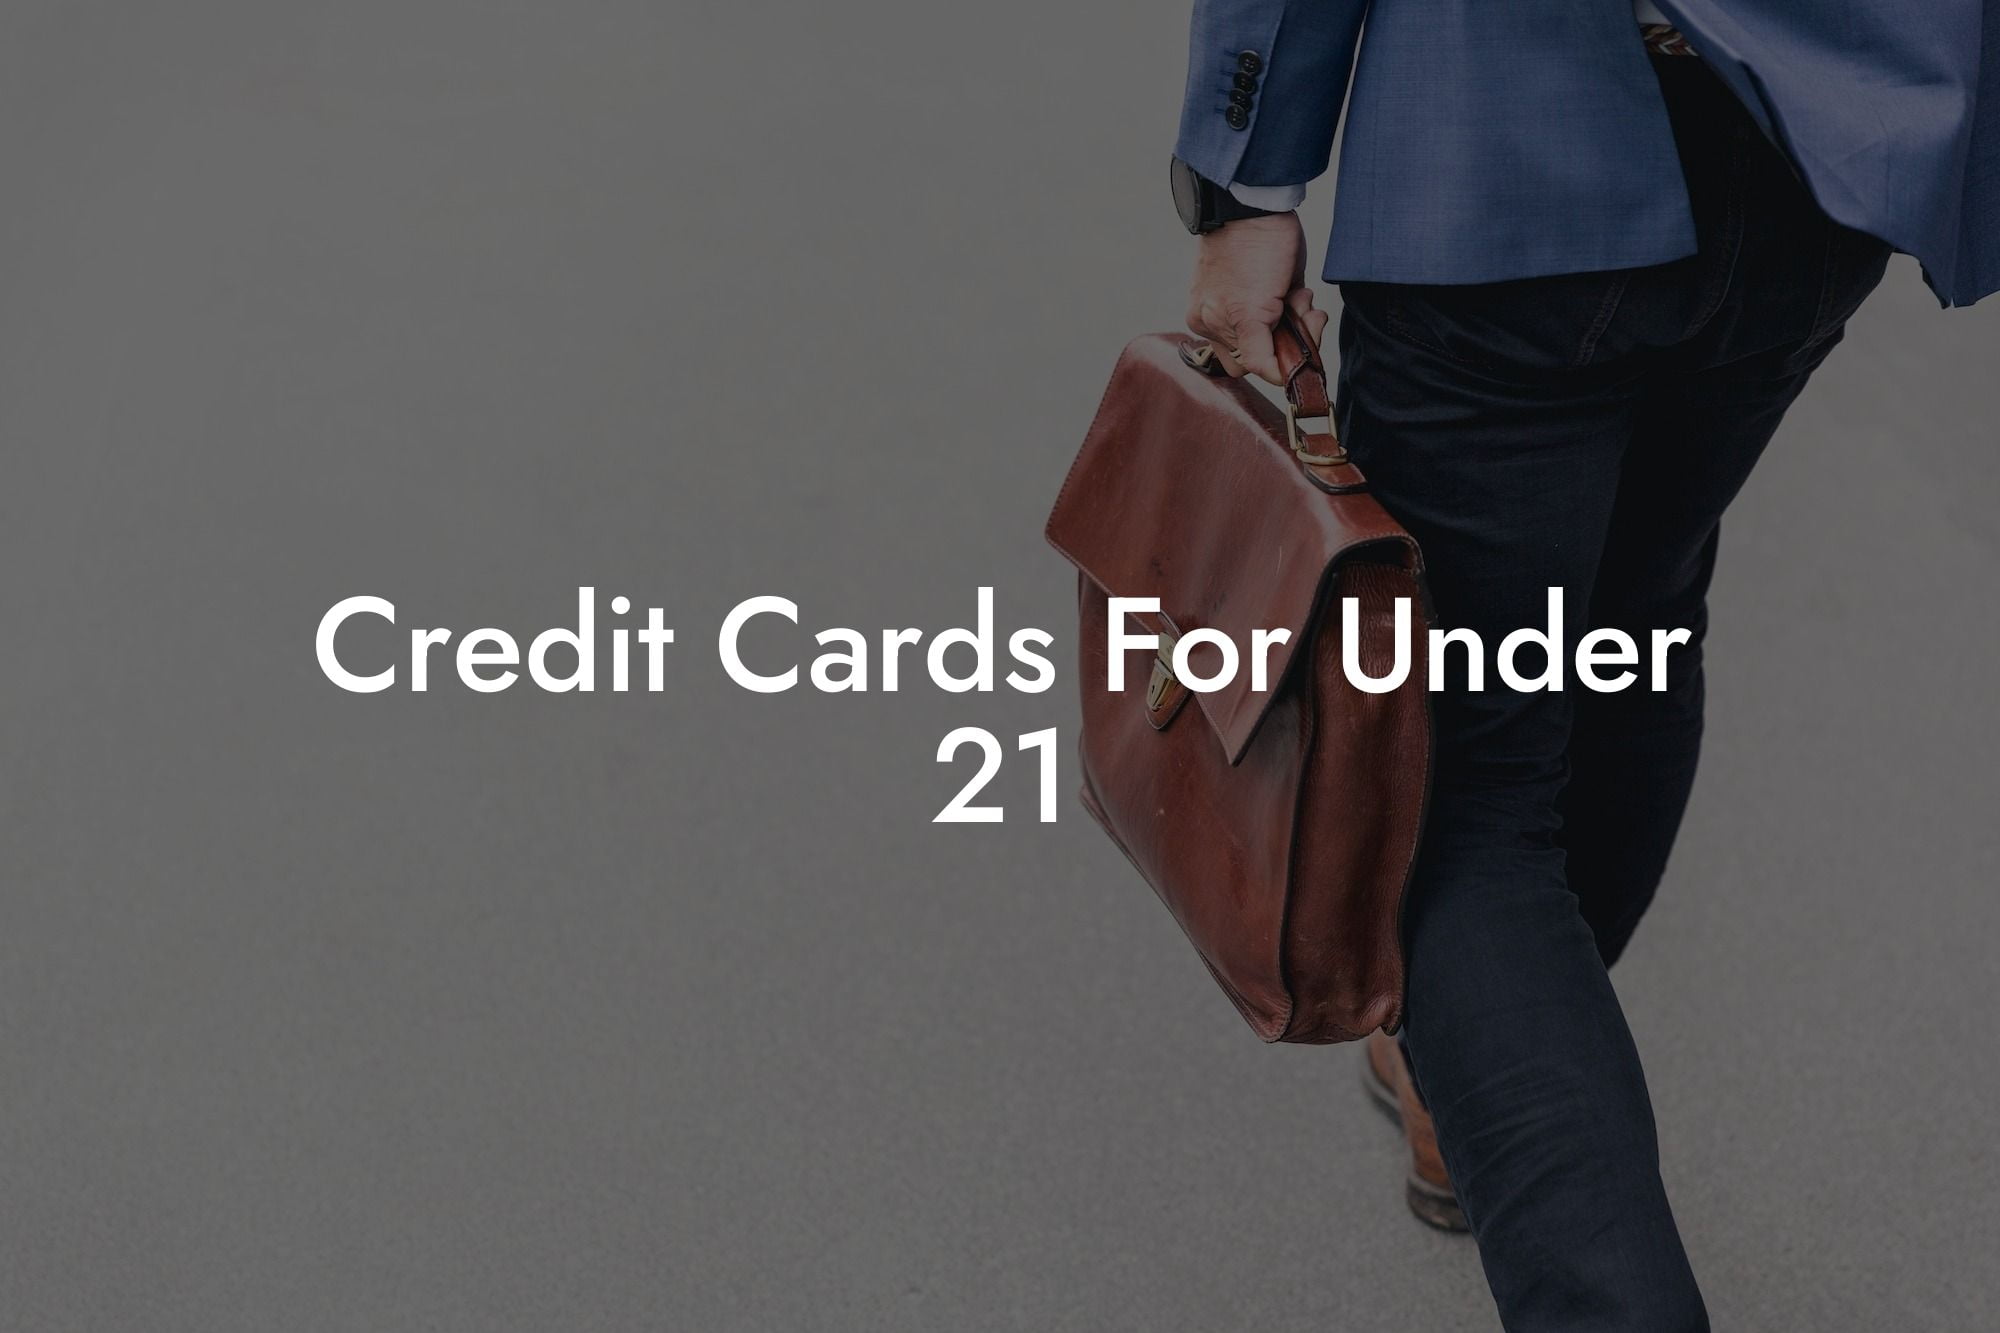 Credit Cards For Under 21